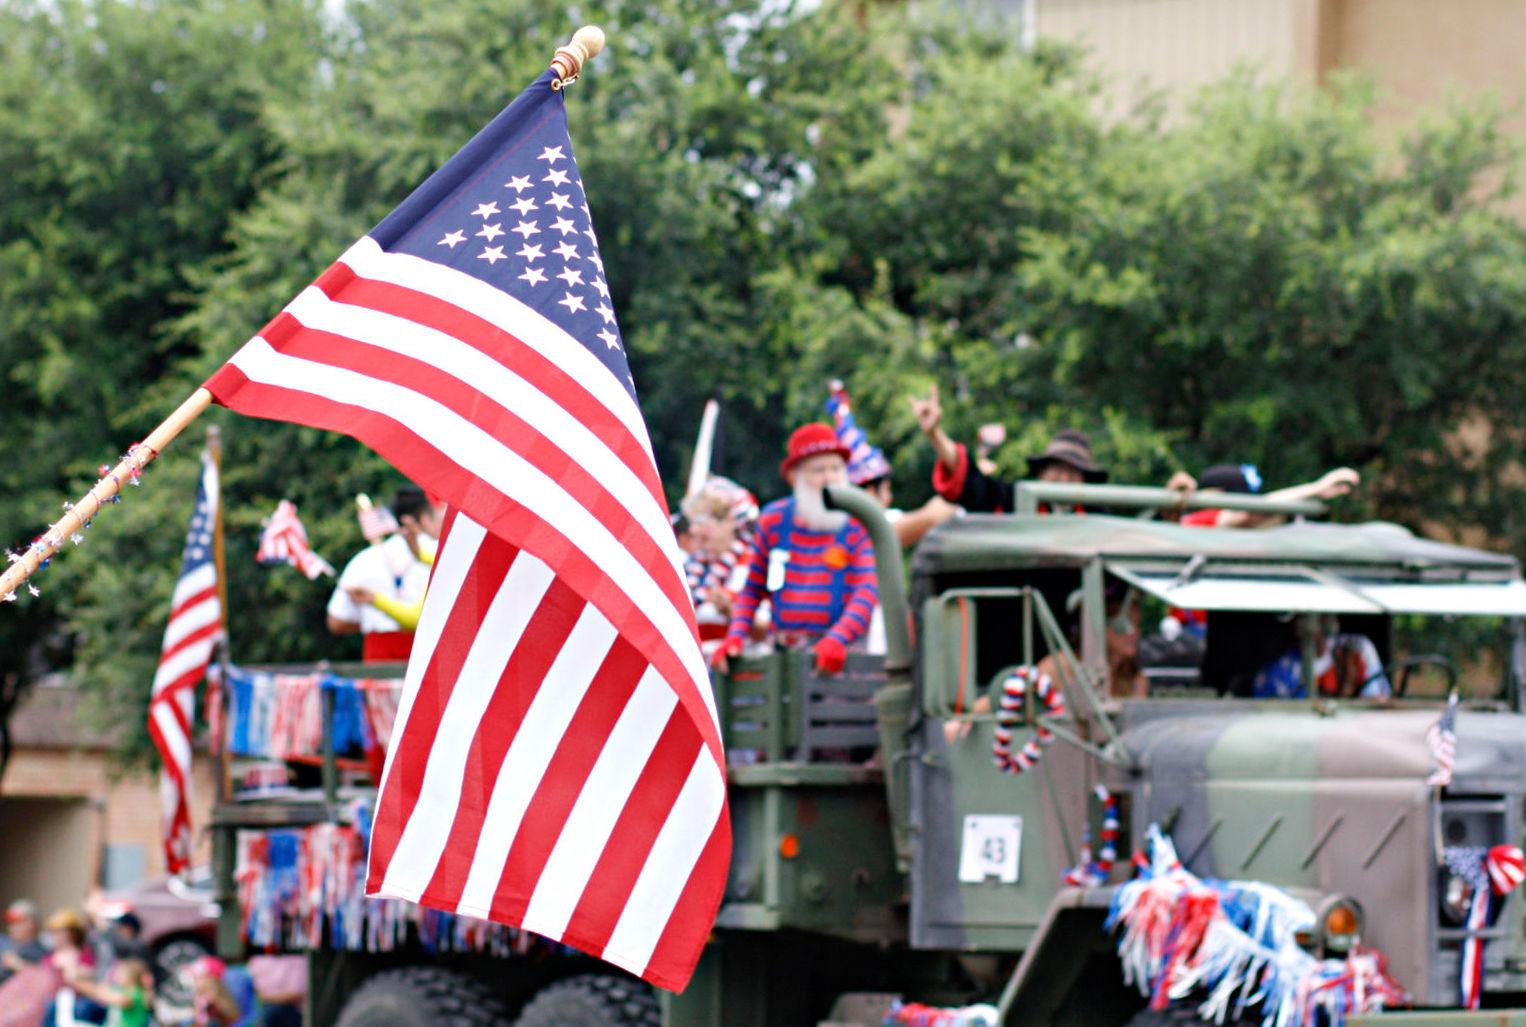 Arlington 4th of July Parade to go through campus because of